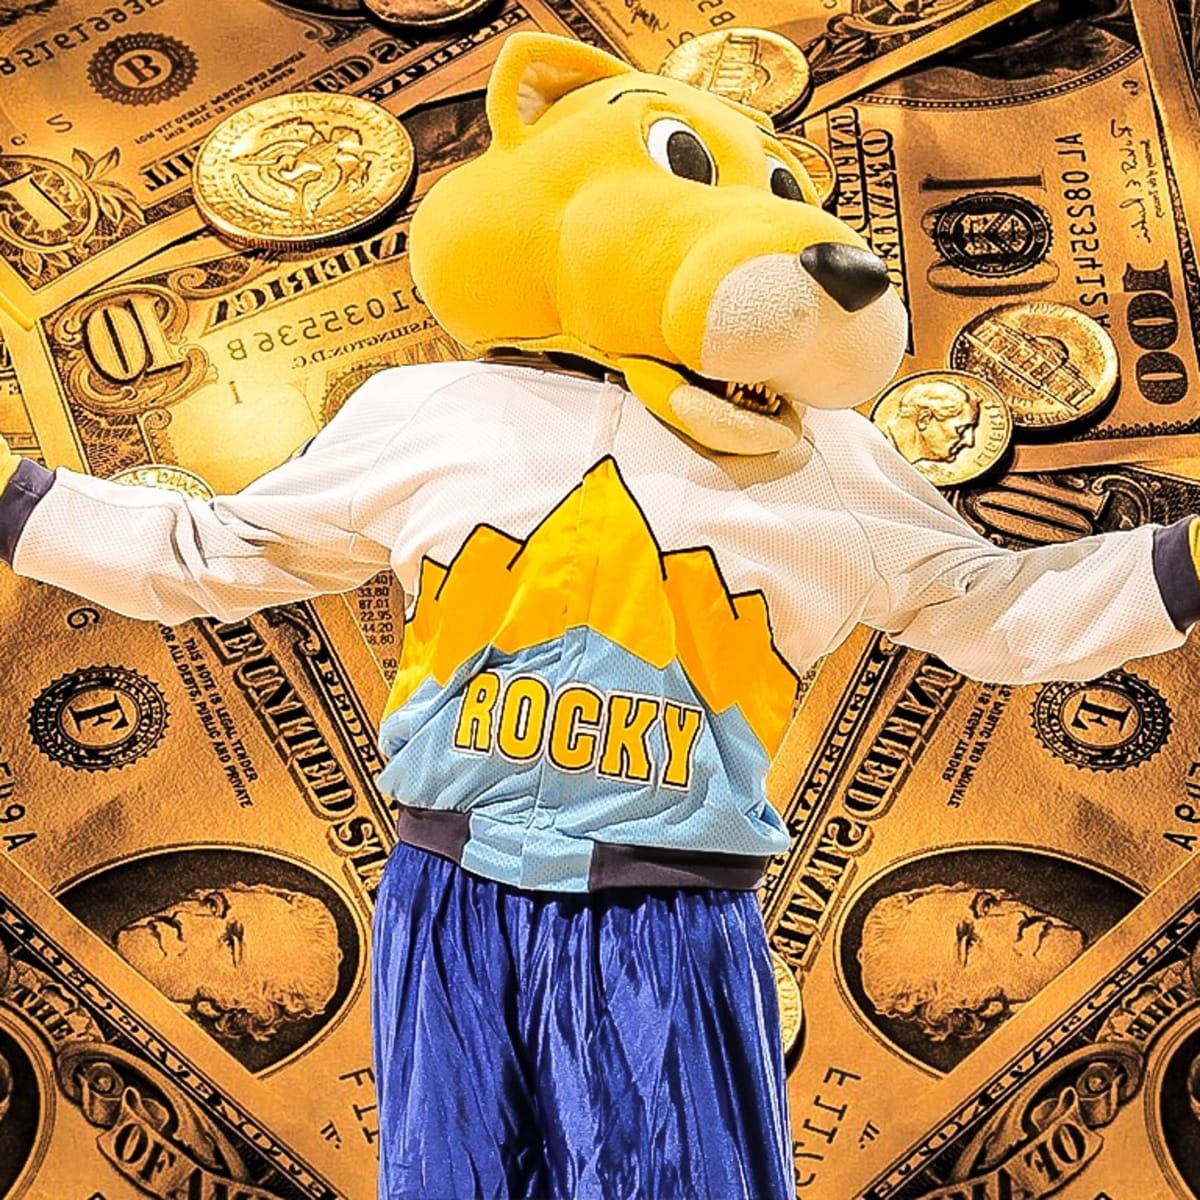 Original Rocky Mascot in the NBA Finals With Denver Nuggets